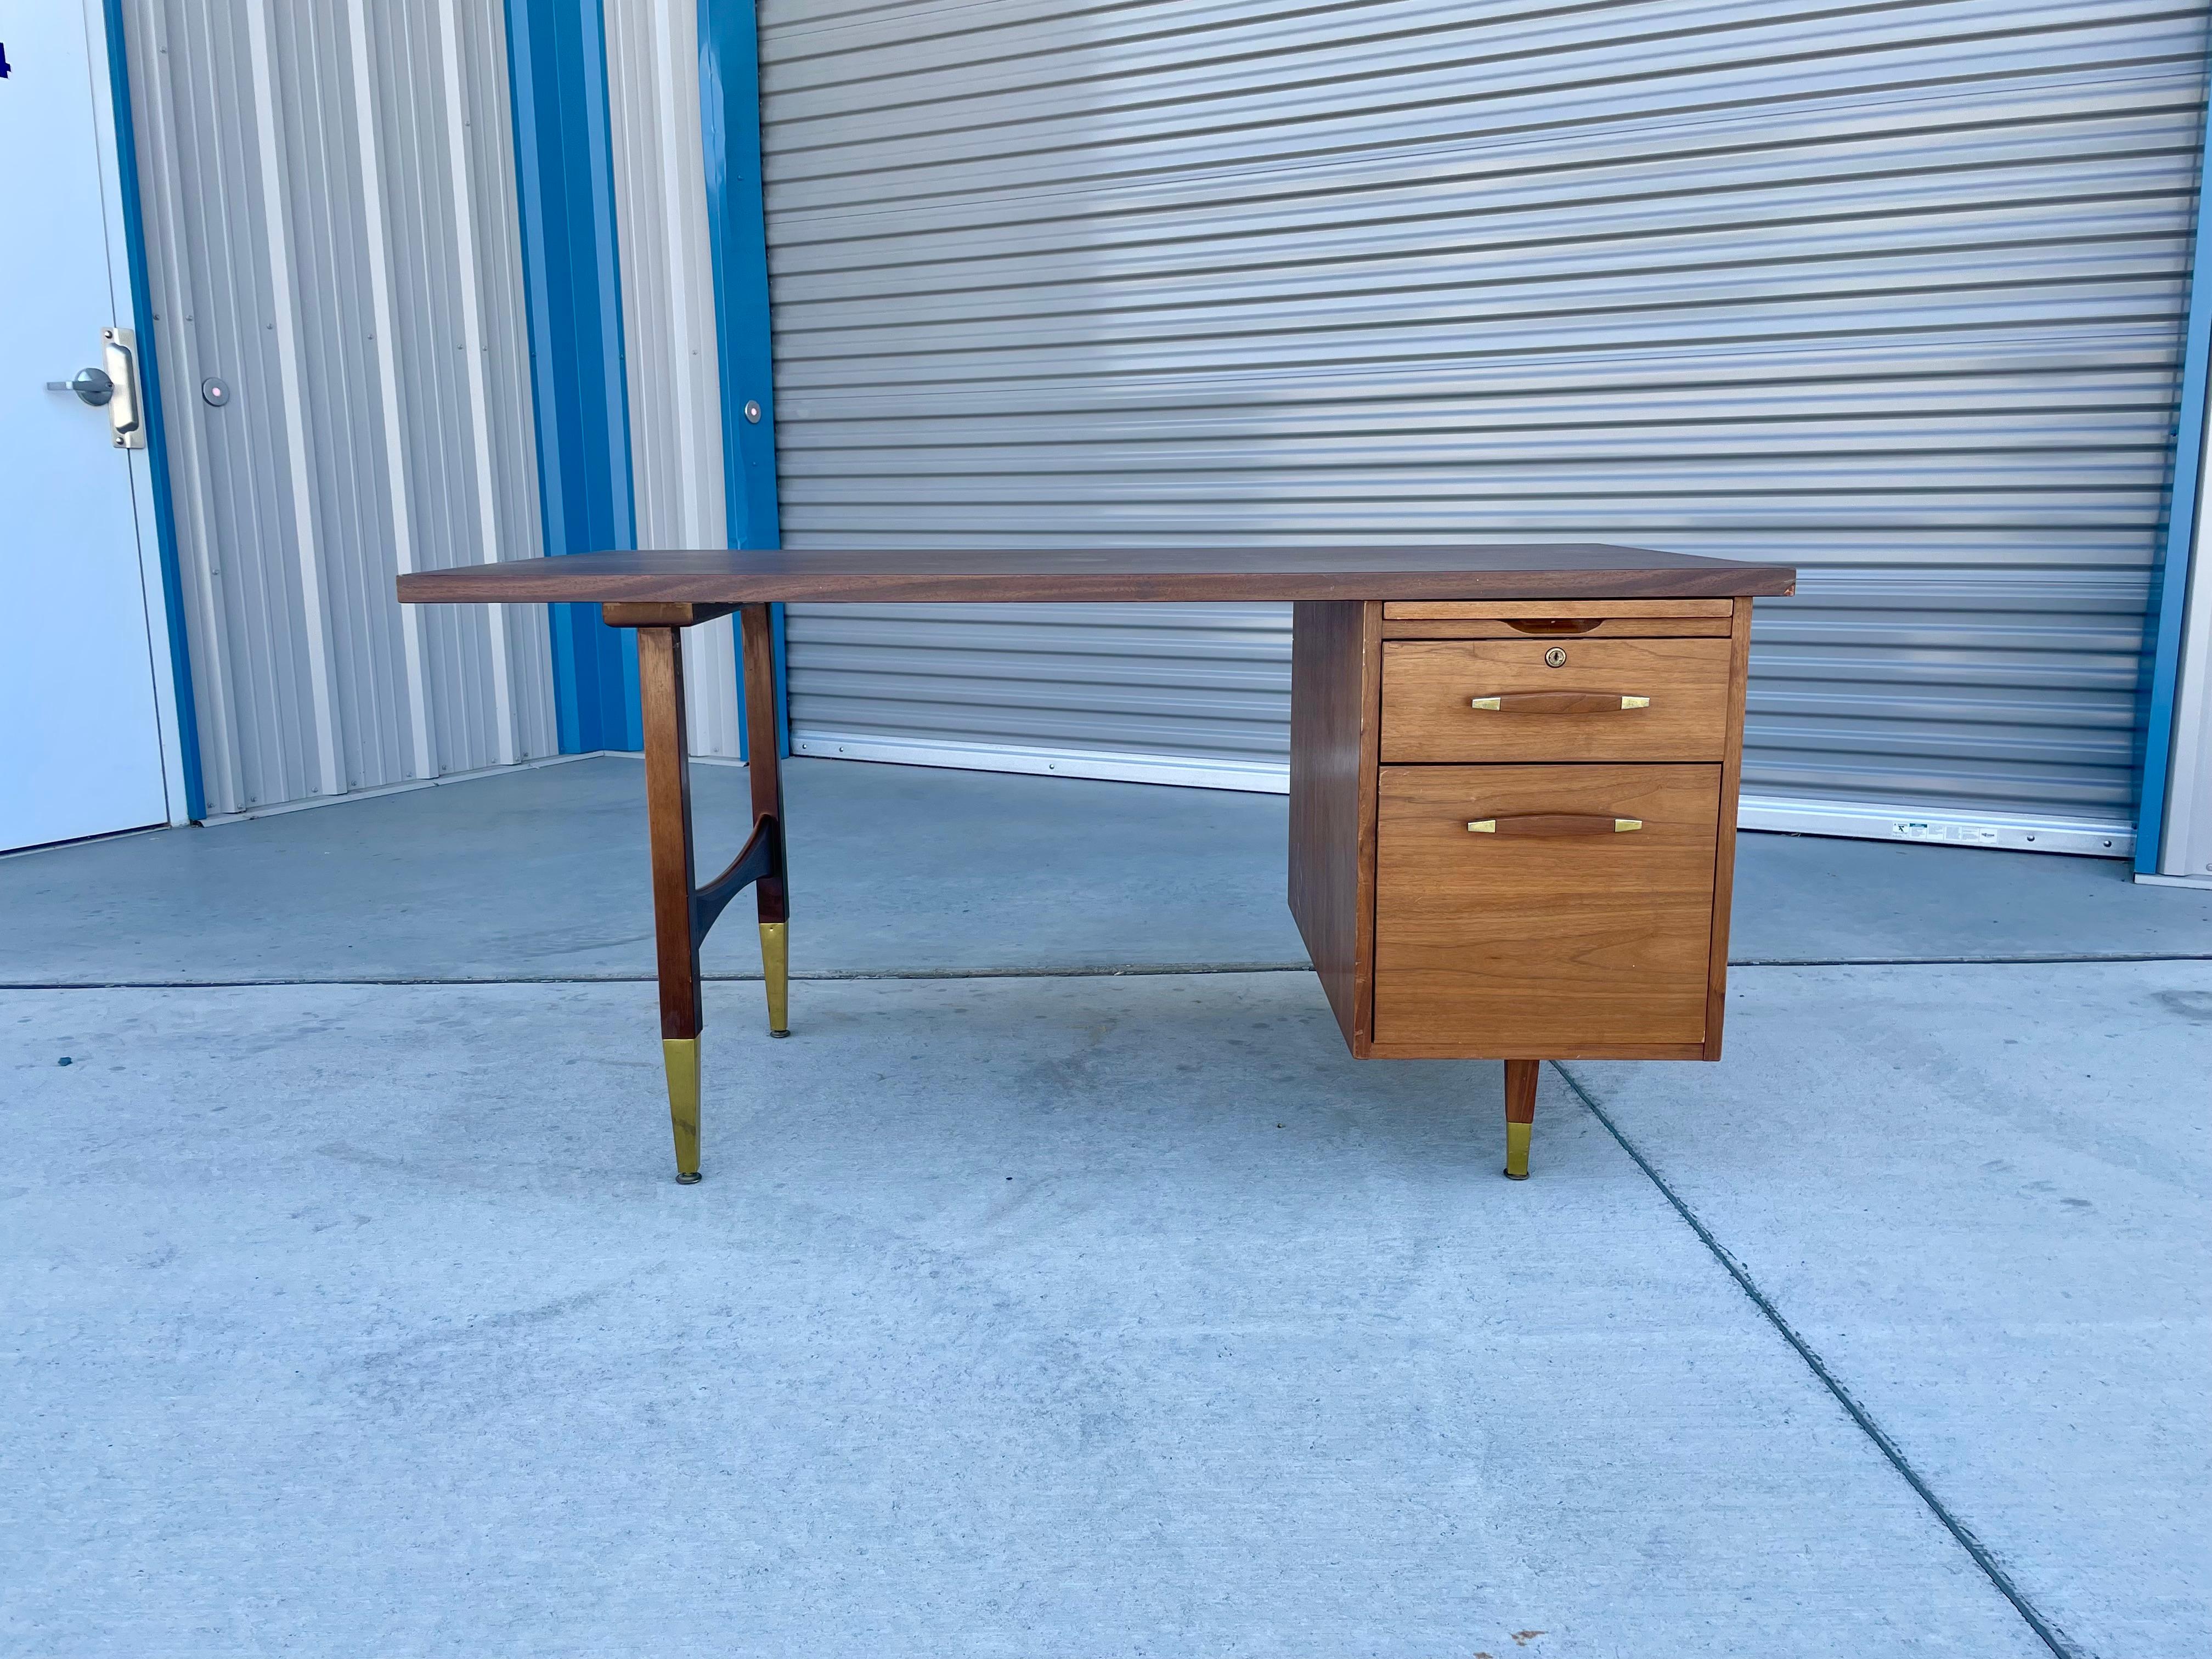 Mid-century walnut executive desk designed and manufactured in the United States circa 1960s. The desk is amazing and boasts a beautiful walnut frame with a sleek formica top. The desk also comes with a pull-out drawer and filling cabinet, offering